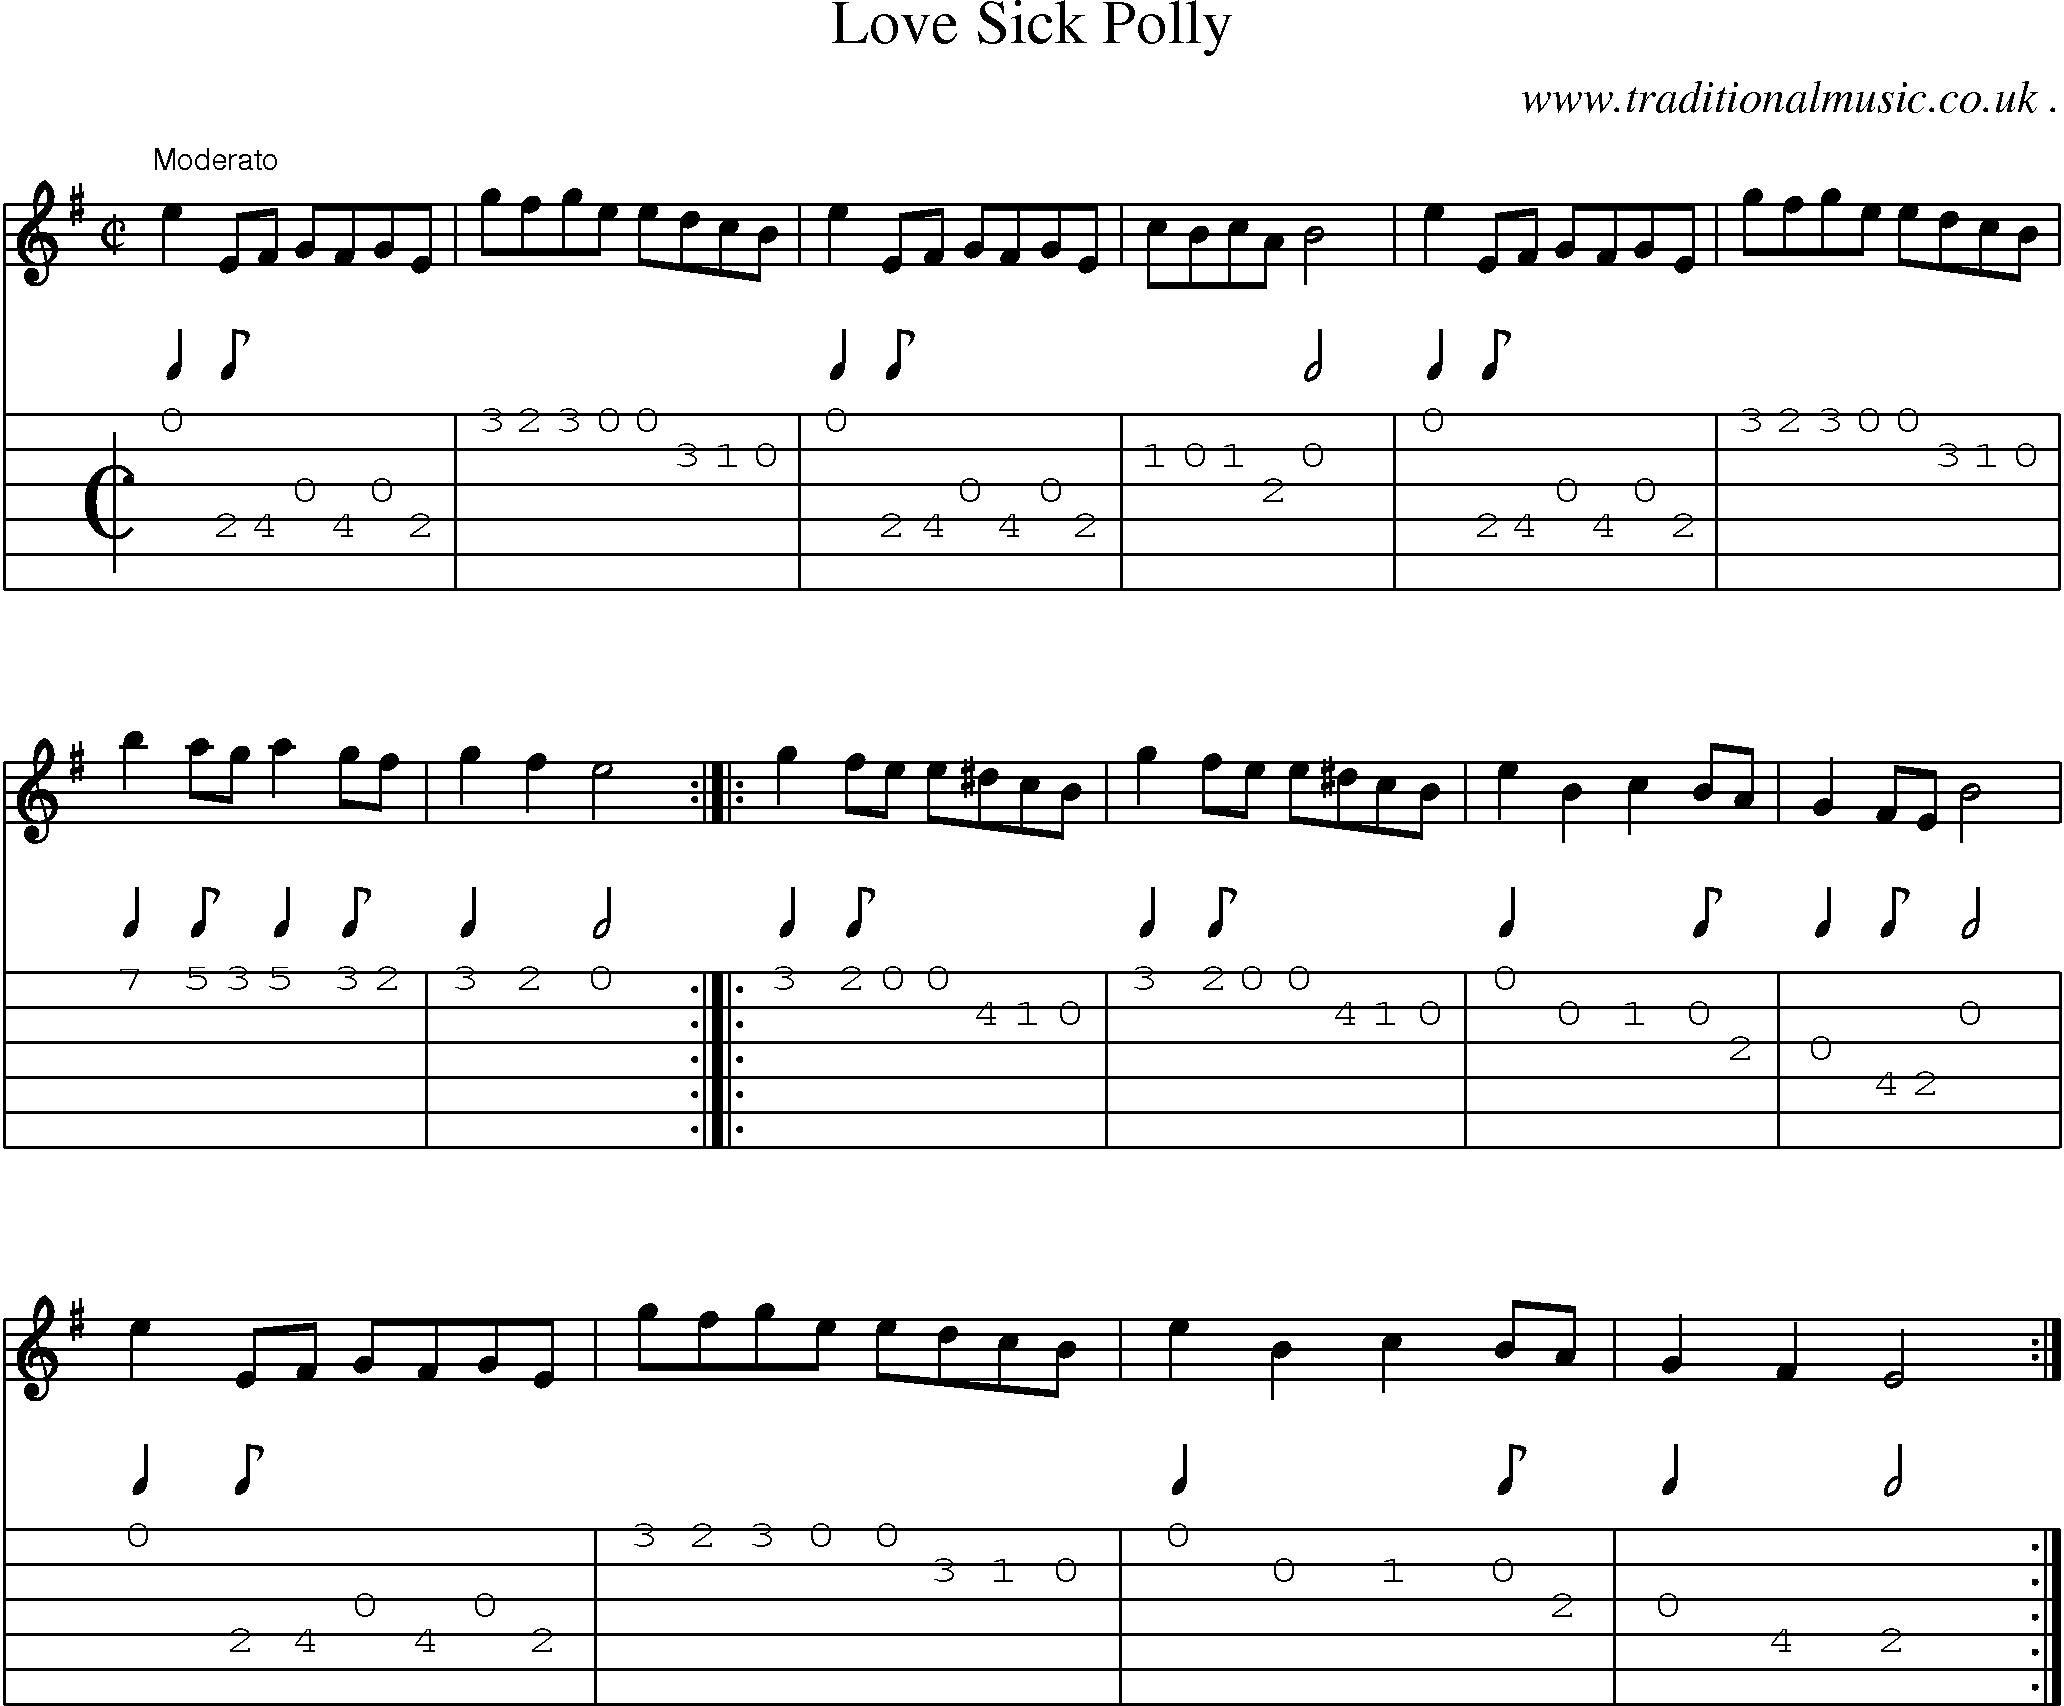 Sheet-Music and Guitar Tabs for Love Sick Polly